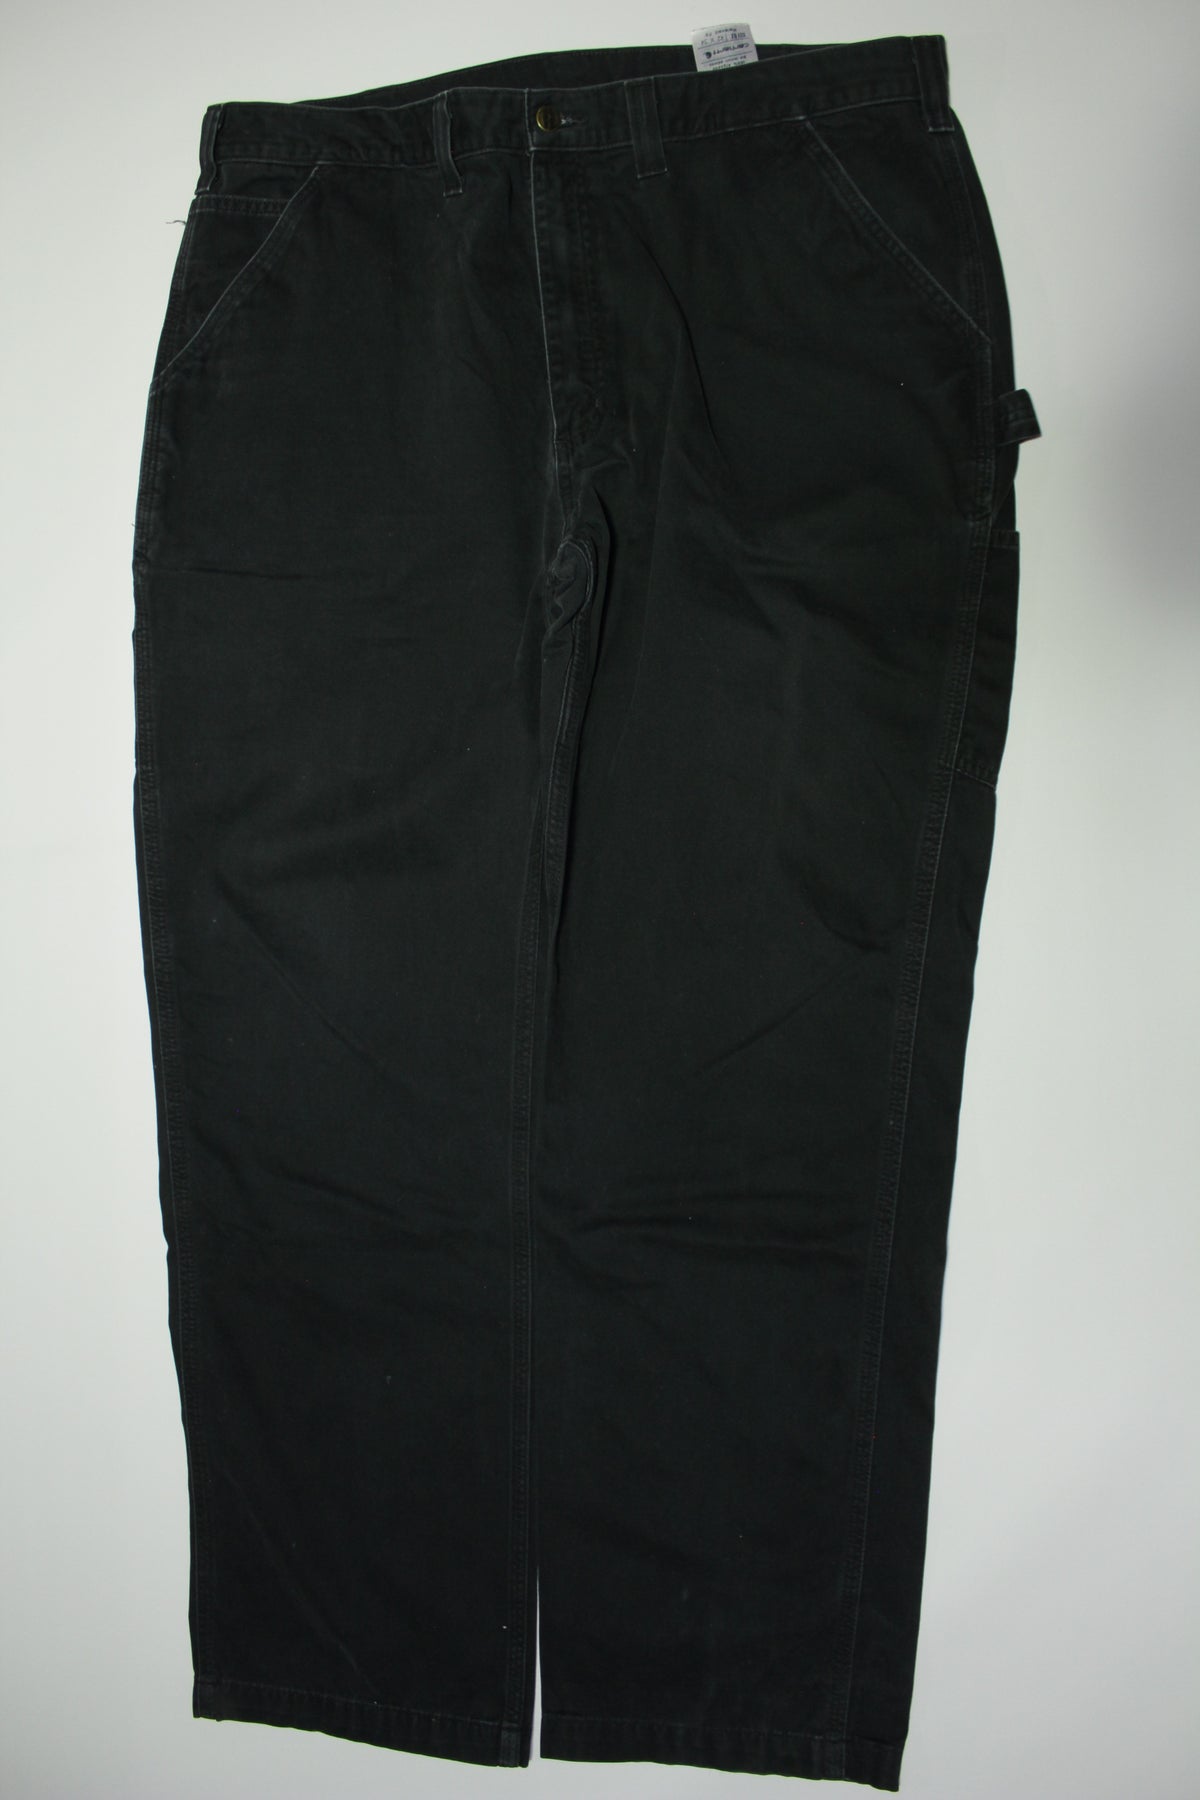 Carhartt B324 BLK Washed Twill Cargo Construction Work Pants